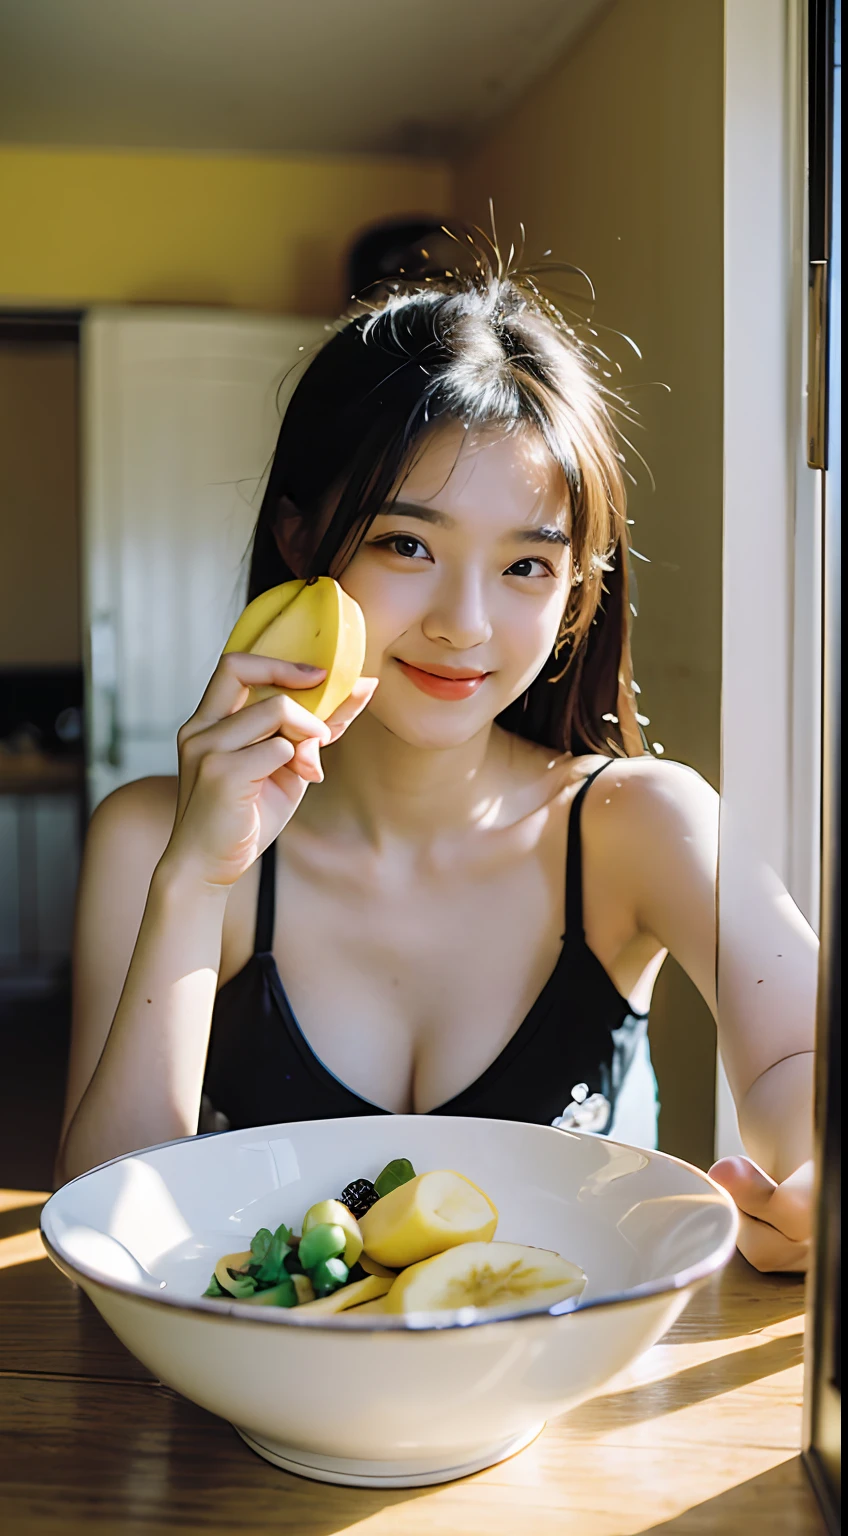 top-quality, ​masterpiece, 超A high resolution, (realisitic: 1.4), OriginalPhotographs, wall-paper, Head Photo, The skin, simple background, Black eye, detaileds, selfy, 1 rapariga, 18 years old, breezing, rays of sunshine, kitchin, eating banana,huge tit